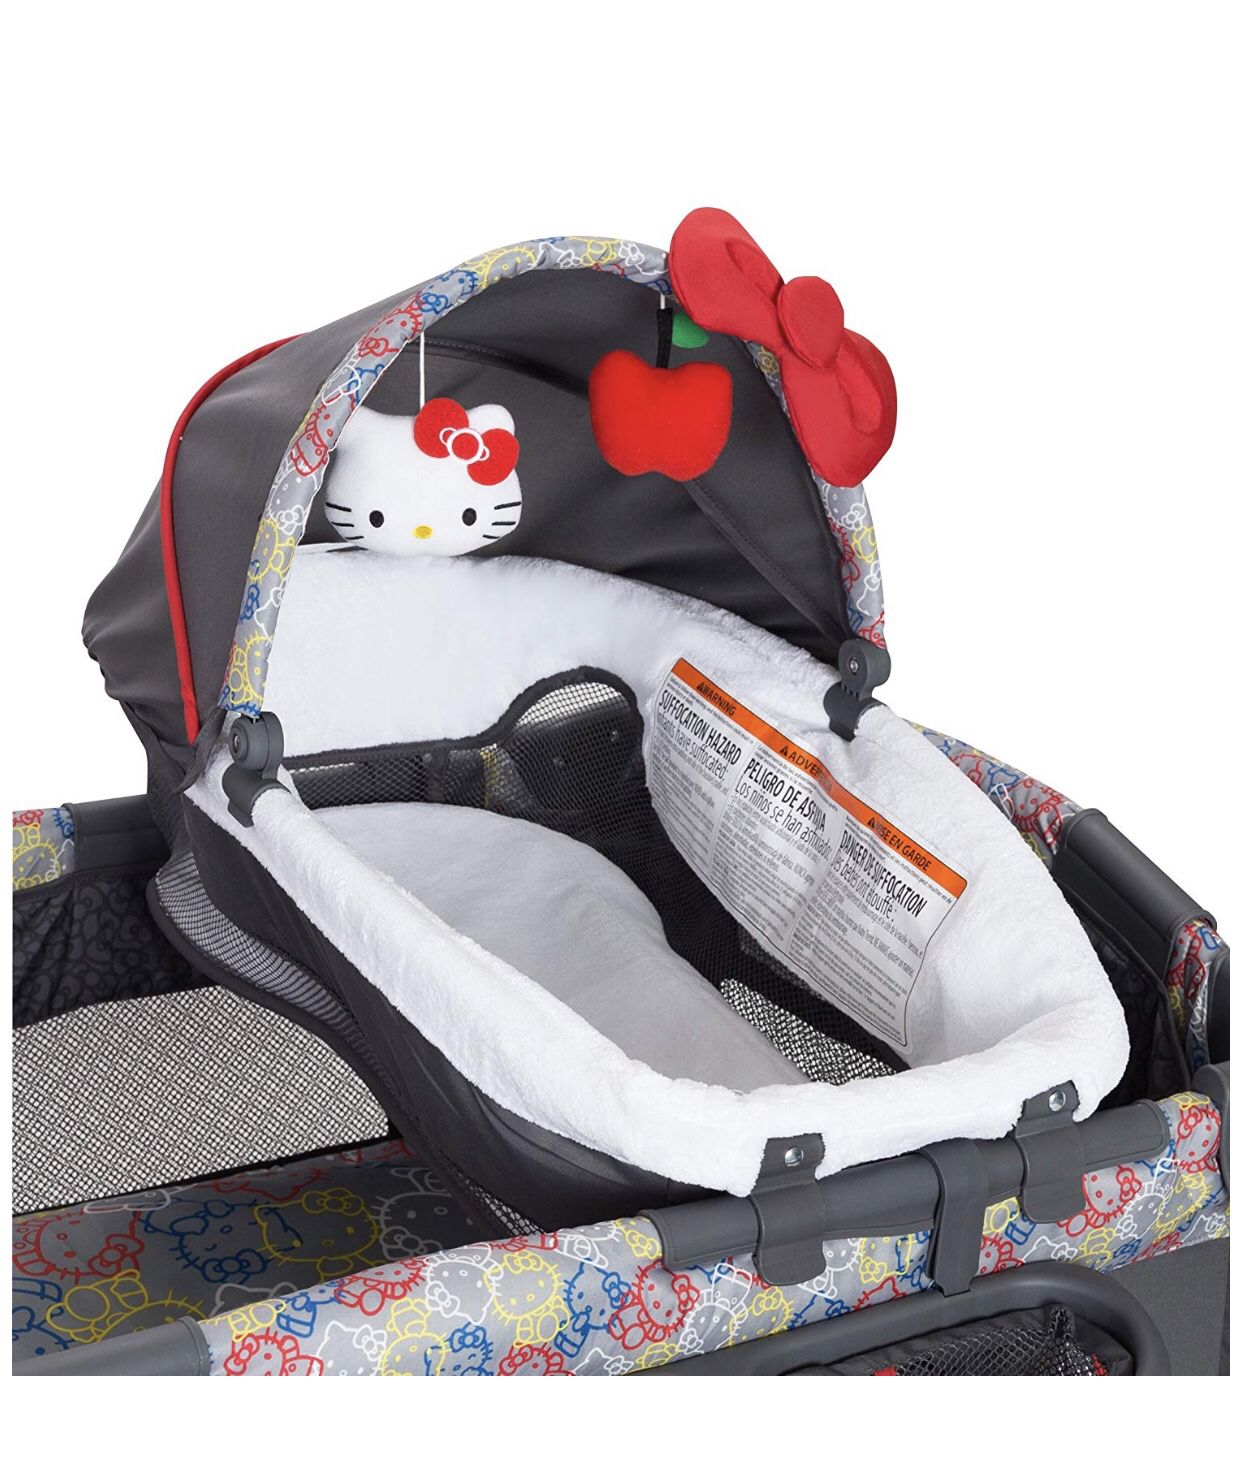 Baby trend deluxe nursery center Hello Kitty expressions